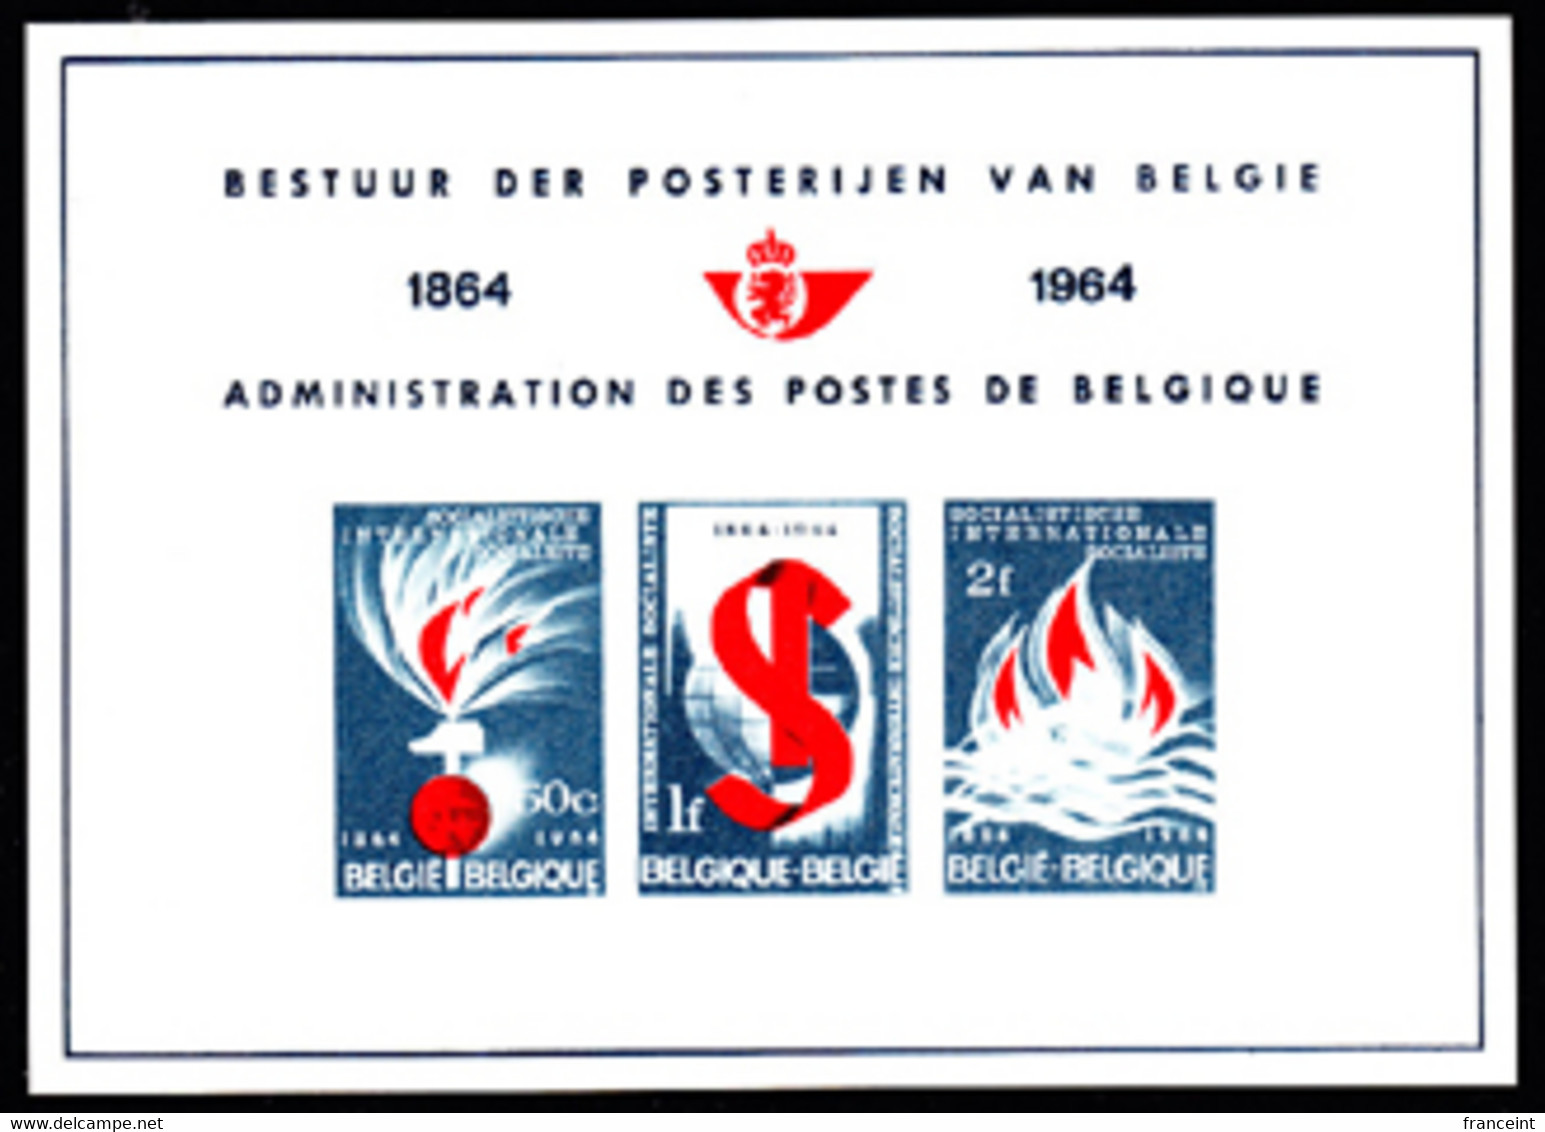 BELGIUM(1964) First Socialist Conference. Deluxe Proof (LX44) Of 3 Values. Scott Nos 611-3, Yvert Nos 1290-2. - Deluxe Sheetlets [LX]